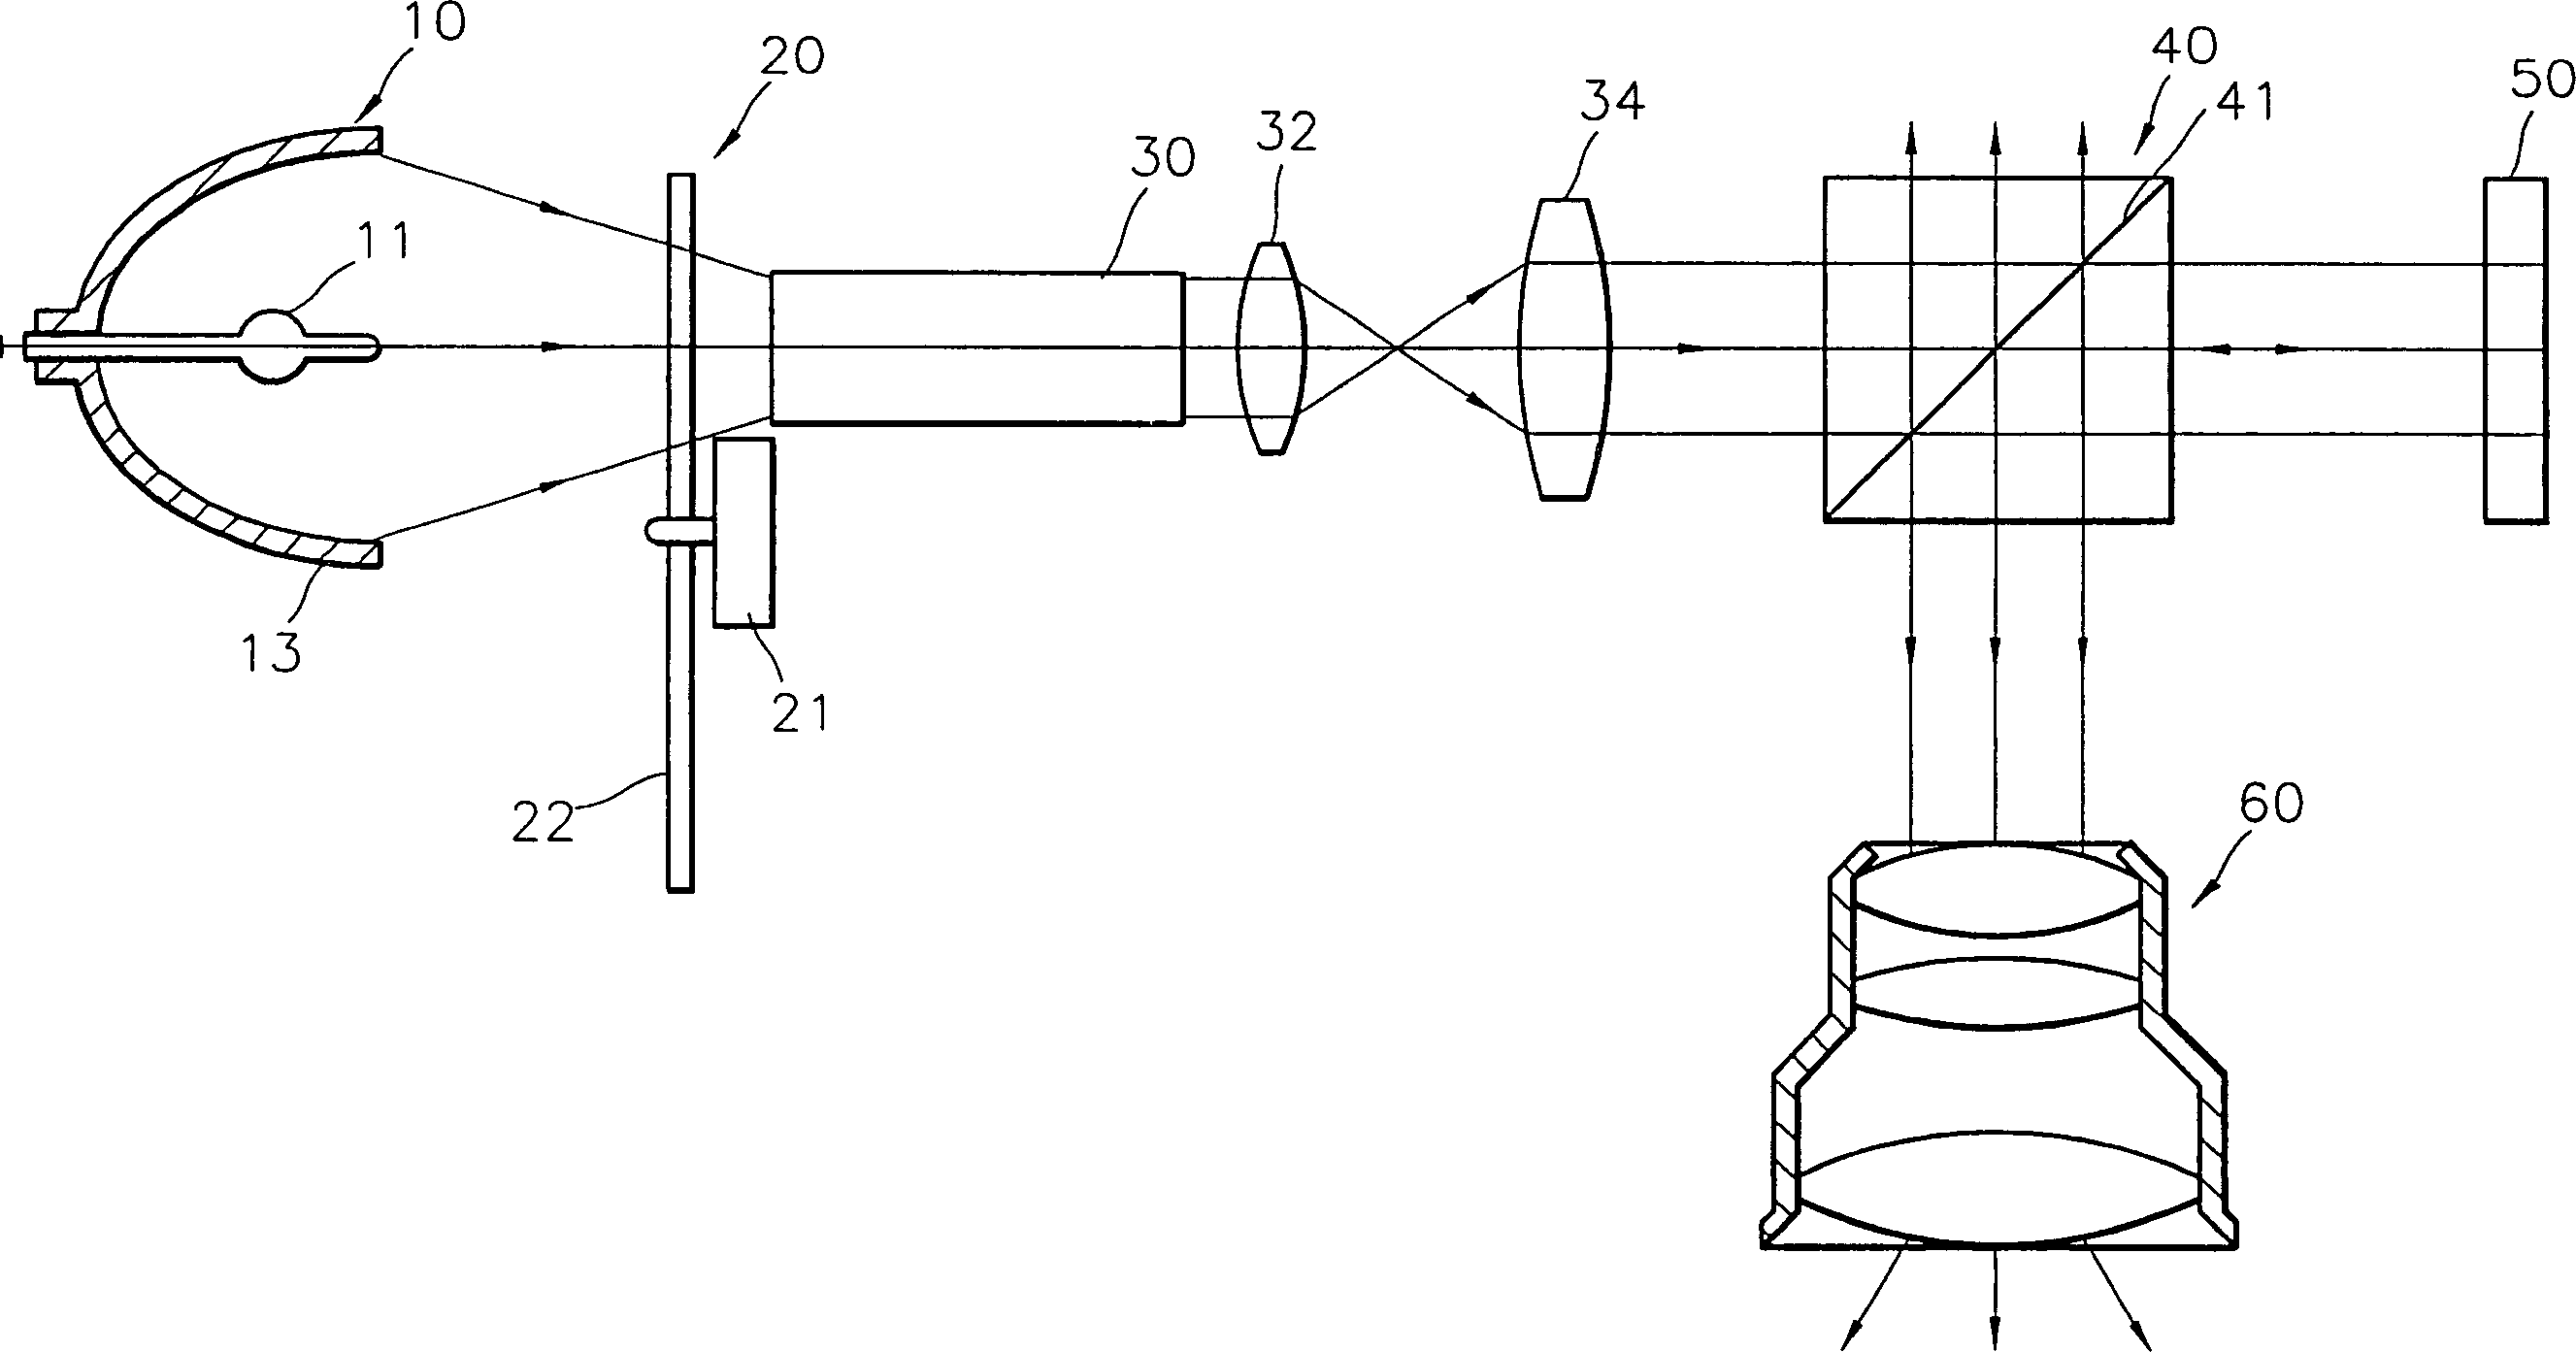 Reflective projecting apparatus